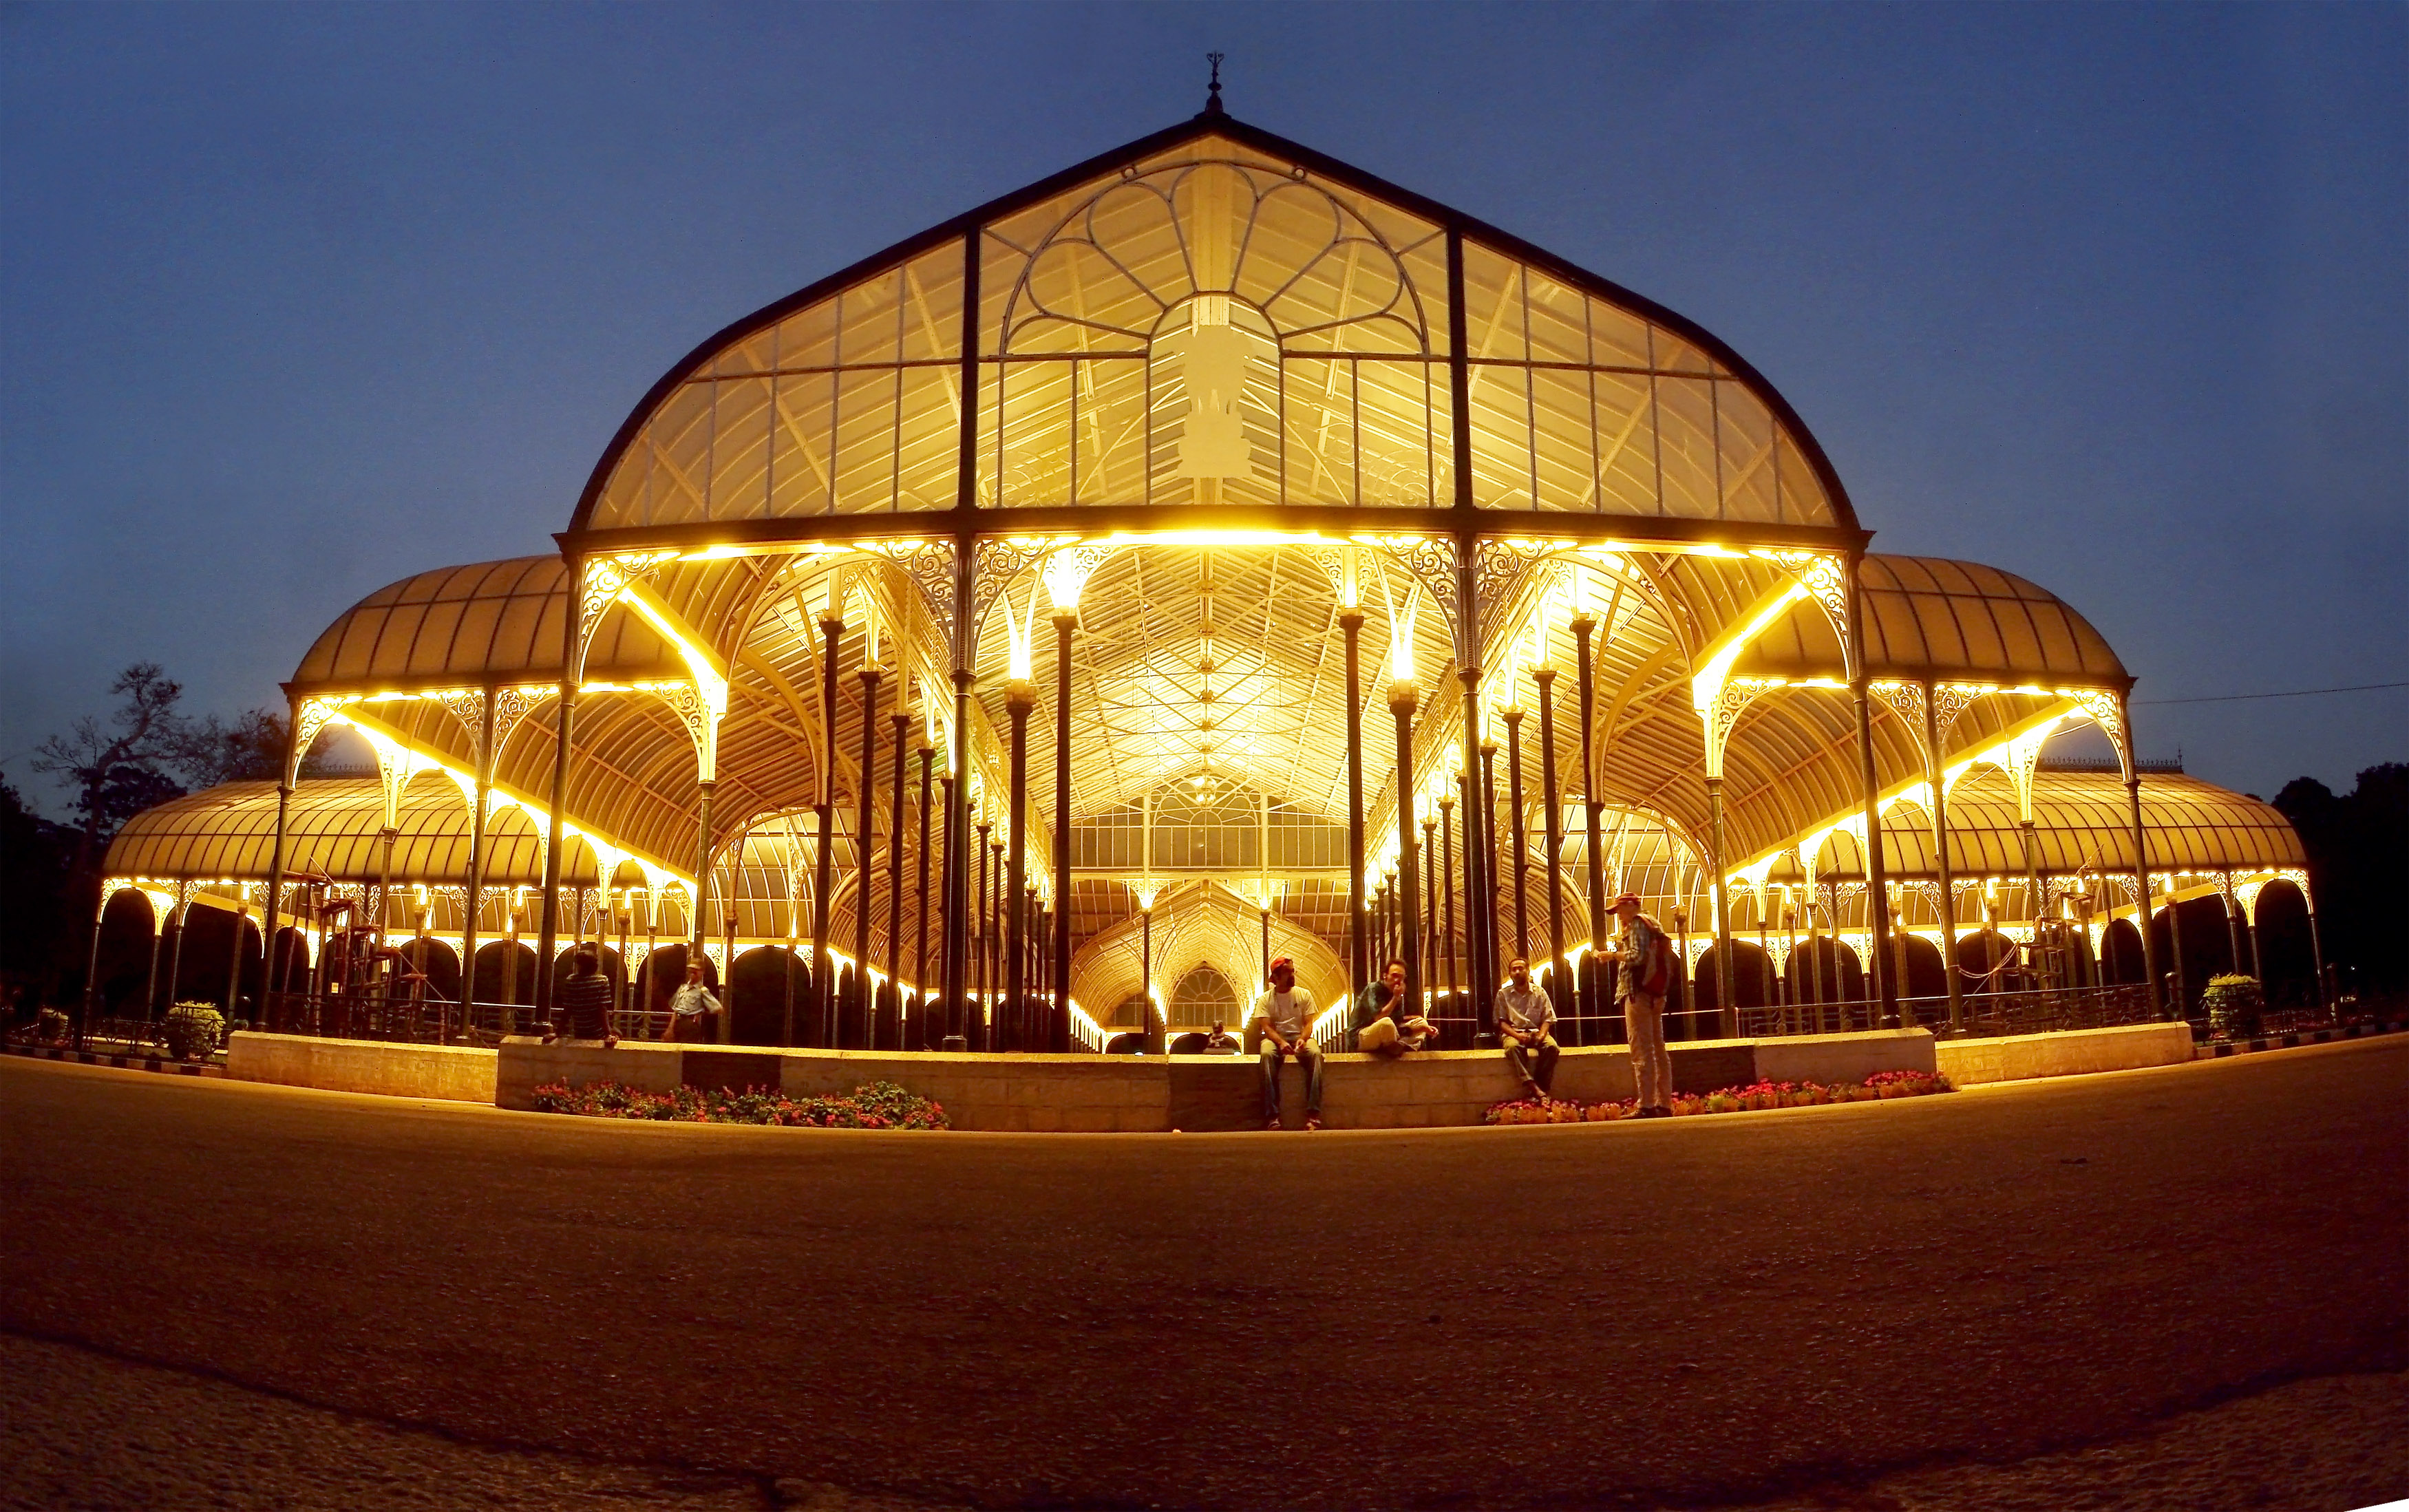 LALBAGH PALACE - INDORE Photos, Images and Wallpapers - MouthShut.com